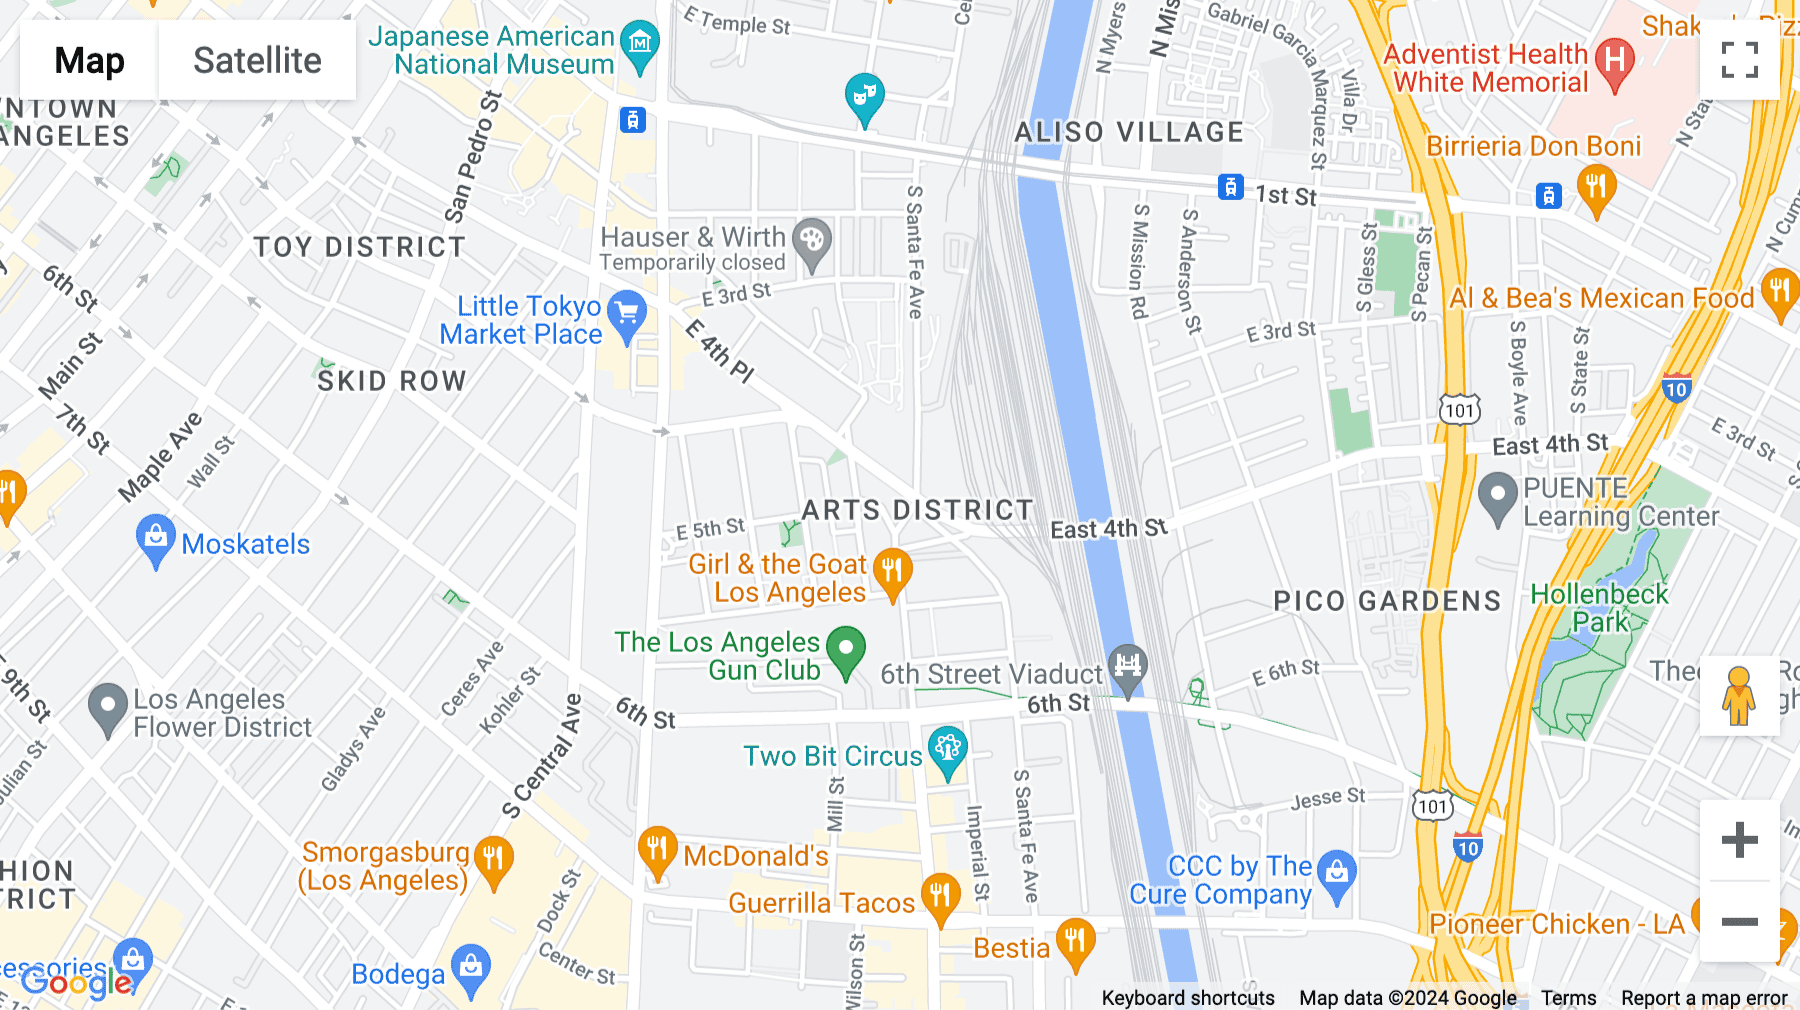 Click for interative map of The Maxwell, 1019 E 4th Place, Los Angeles, CA, Los Angeles